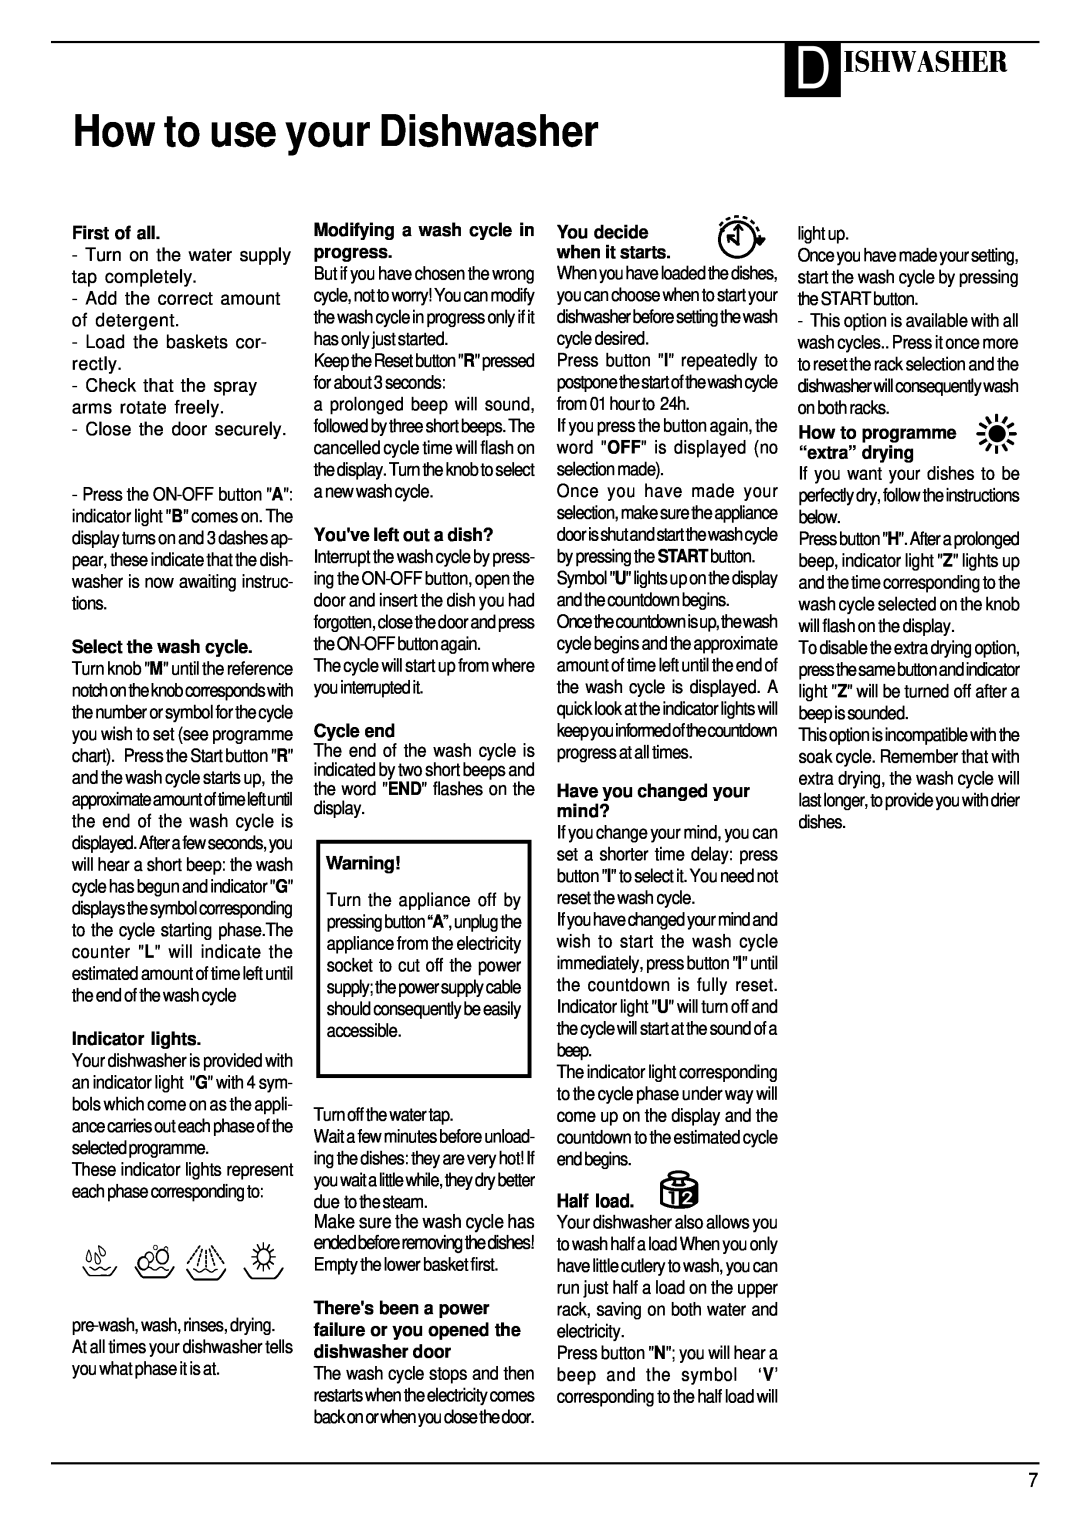 Hotpoint BFZ 680 manual How to use your Dishwasher, D Ishwasher, Half load, How to programme “extra” drying 